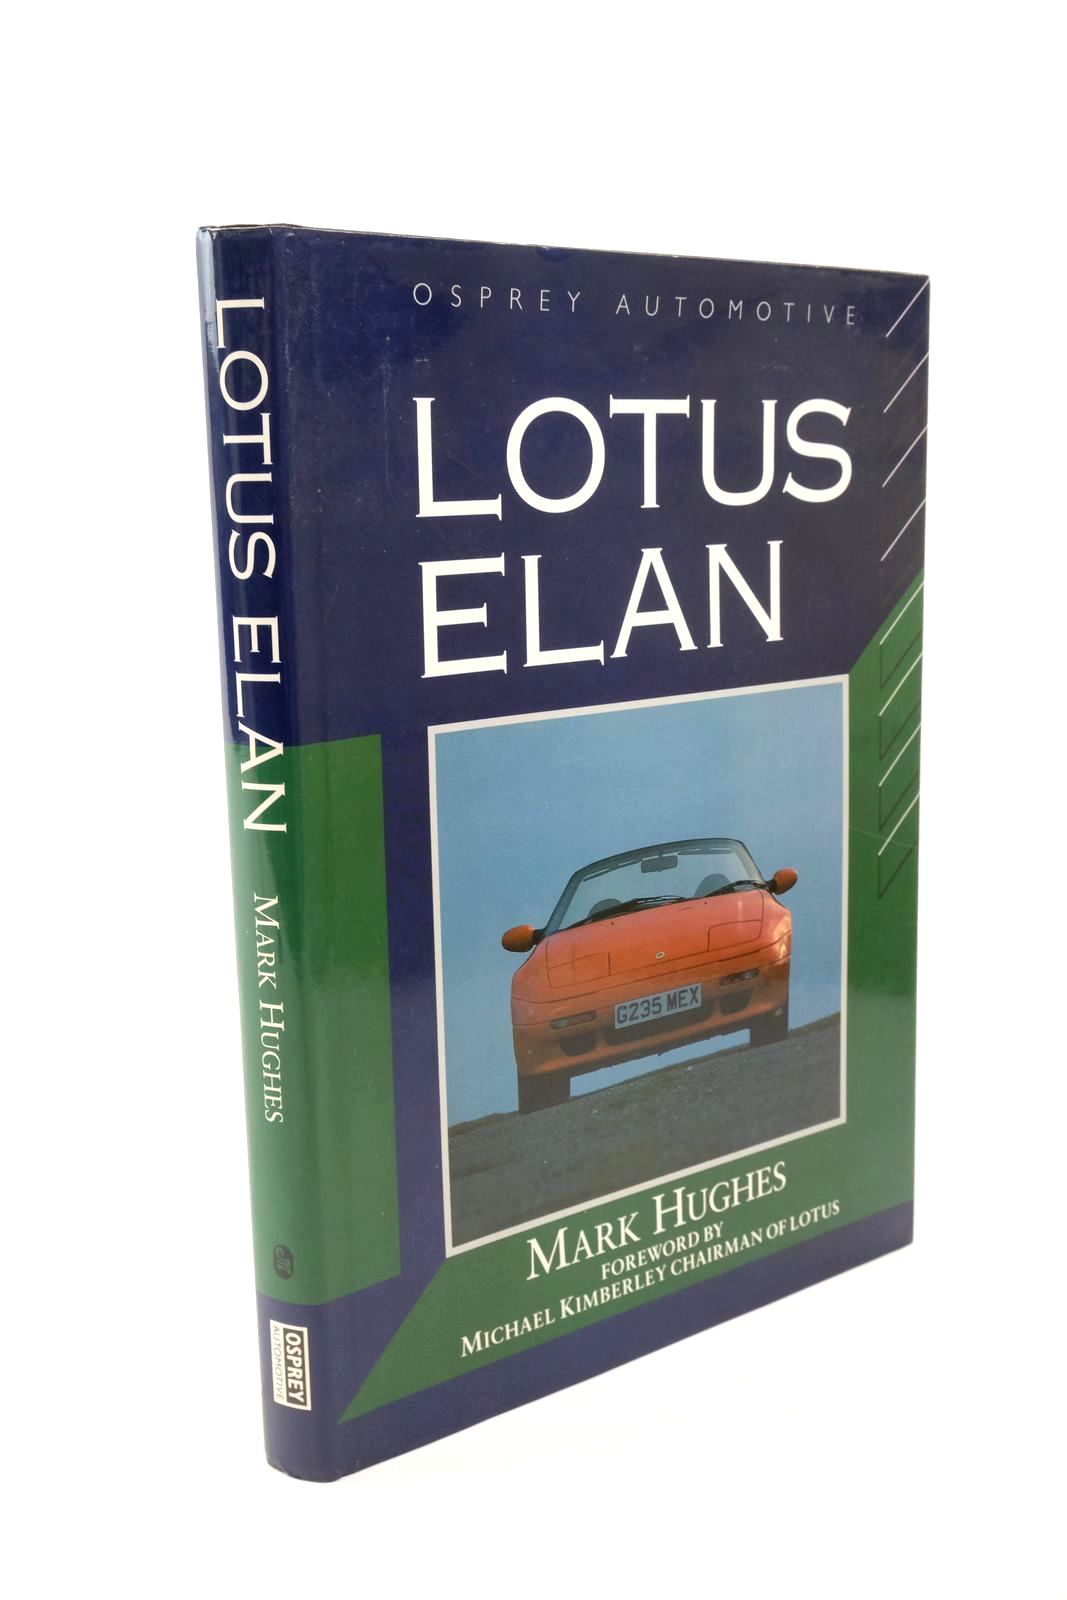 Photo of LOTUS ELAN written by Hughes, Mark published by Osprey Automotive (STOCK CODE: 1322472)  for sale by Stella & Rose's Books